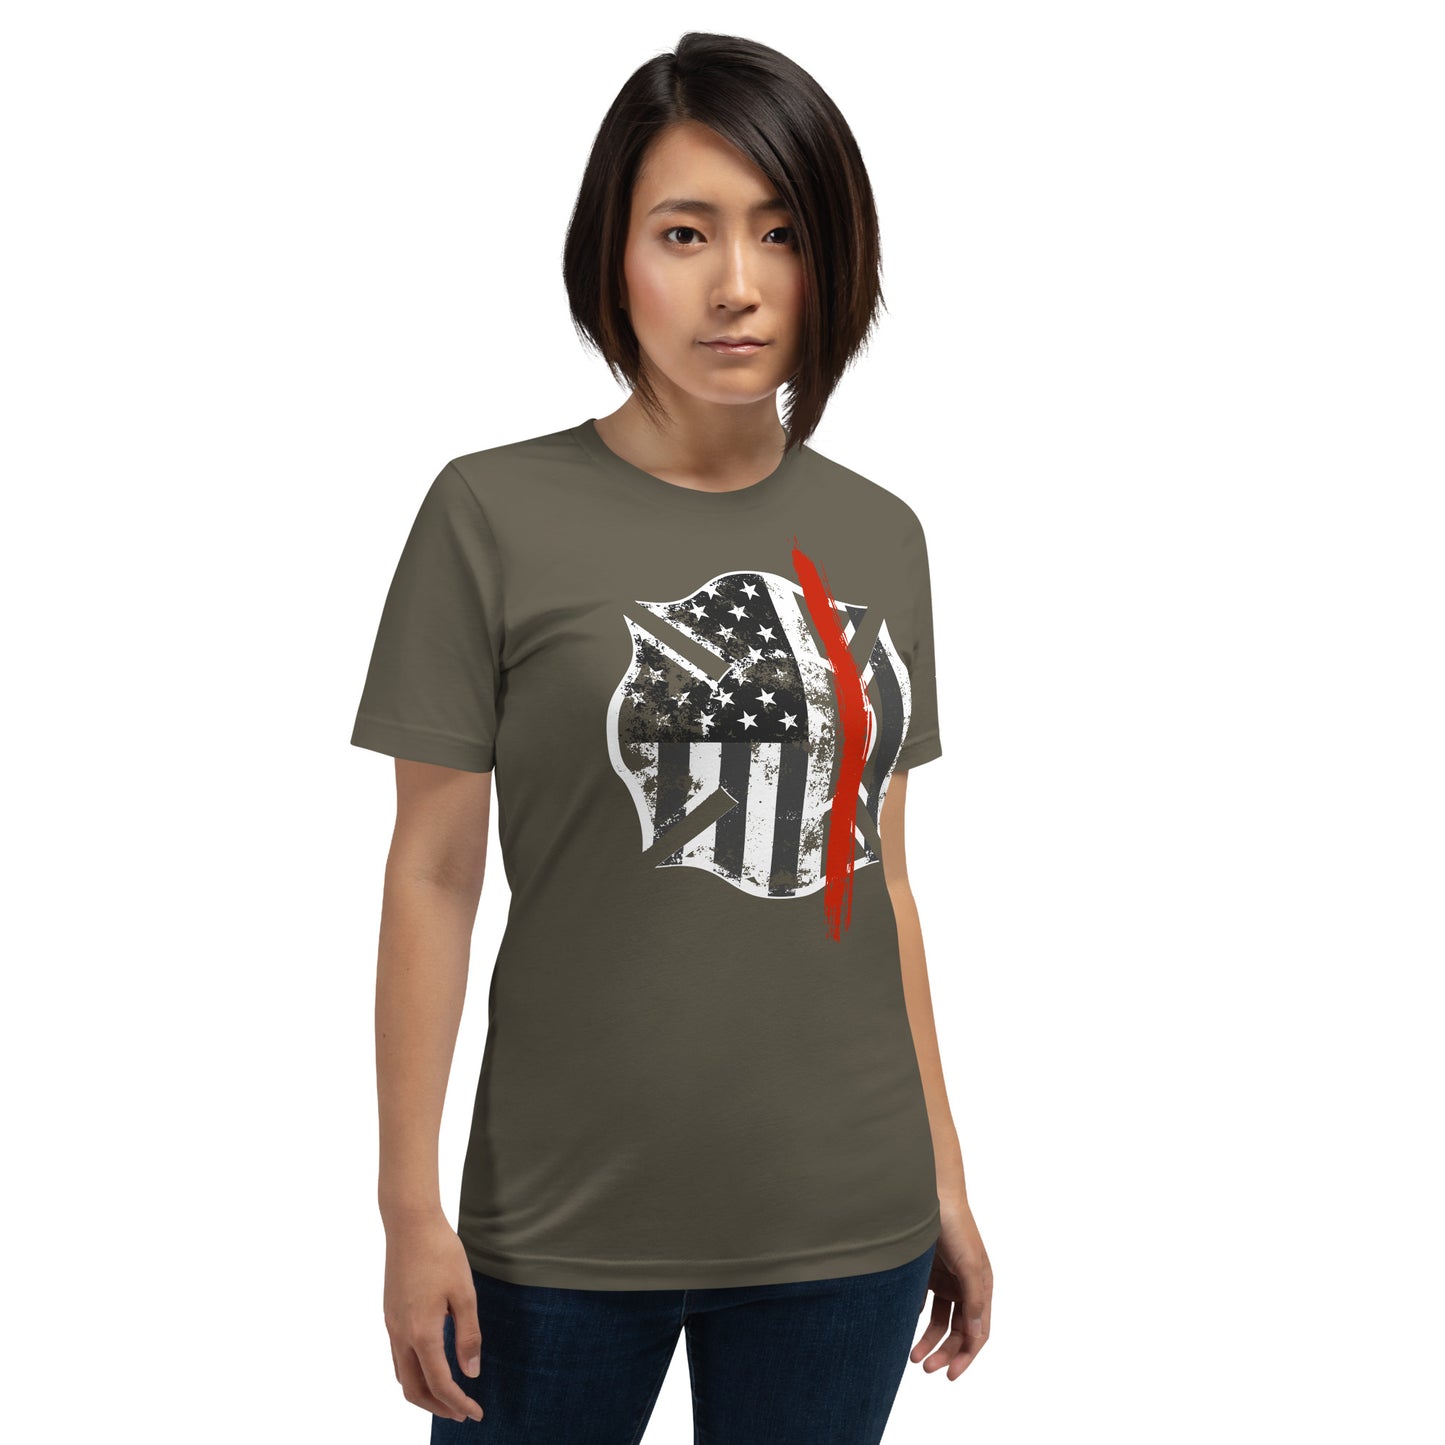 Back the Red t-shirt. Firefighter Thin Red Line shirt in army green..